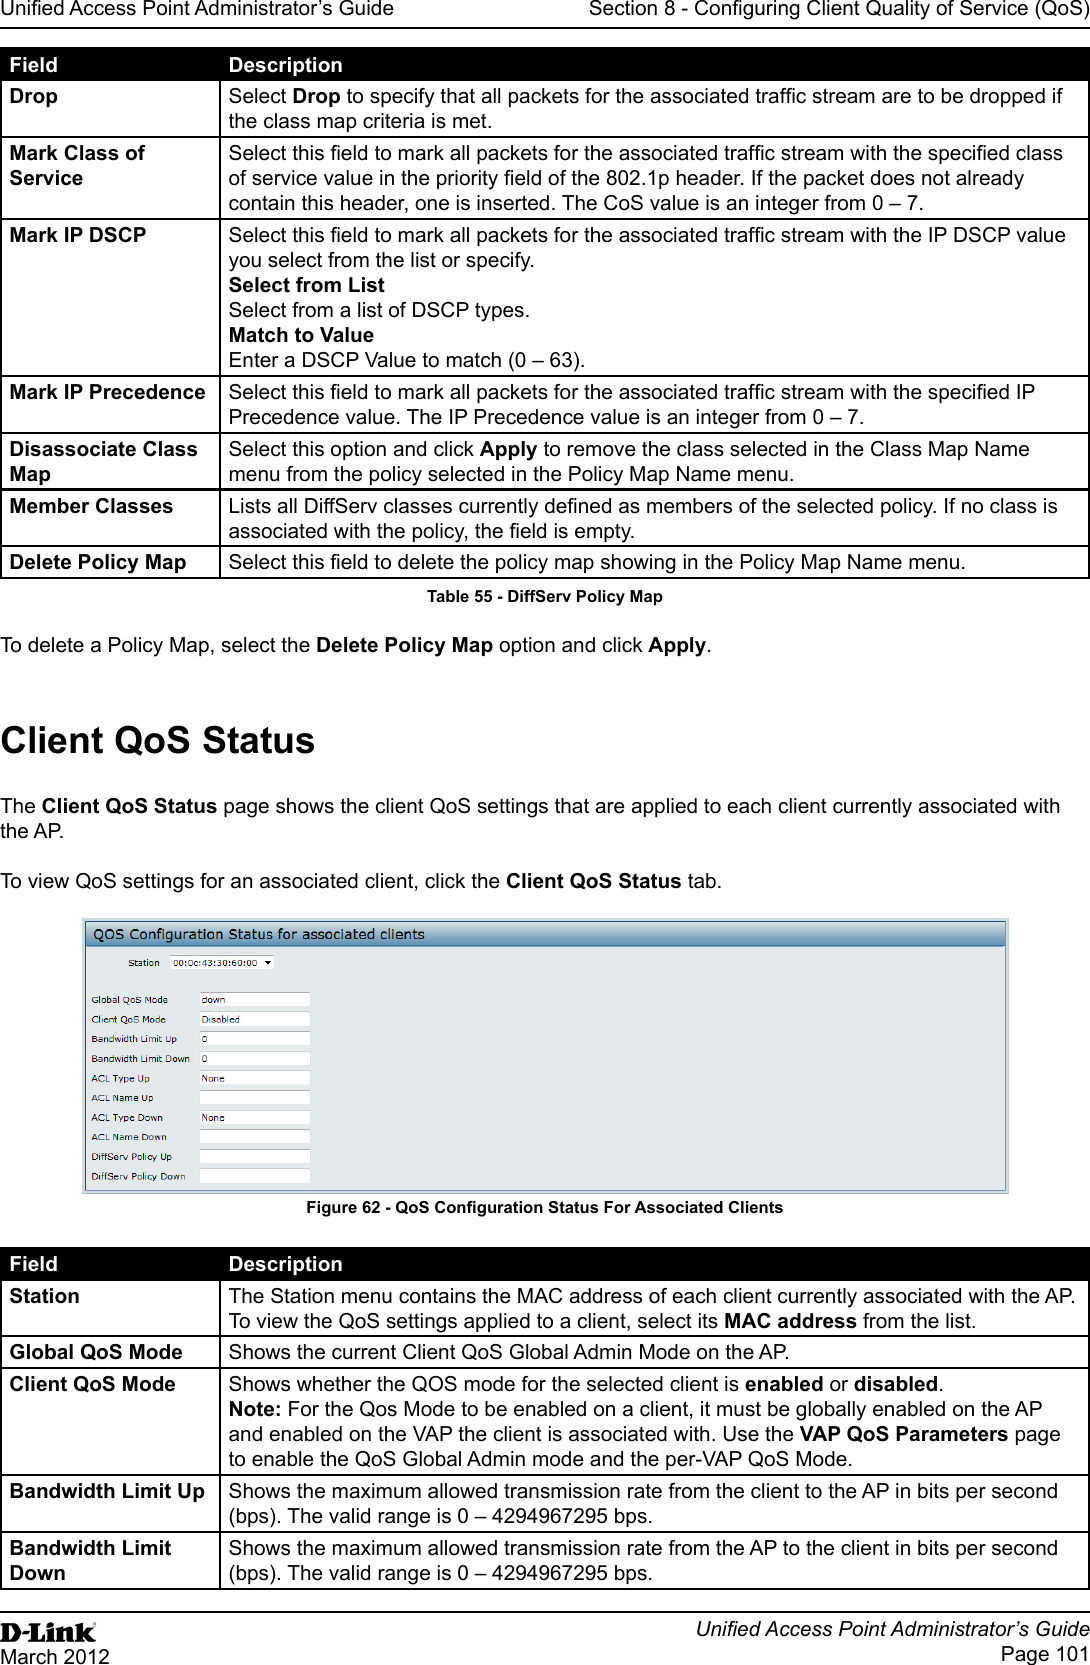 Unied Access Point Administrator’s GuideUnied Access Point Administrator’s GuidePage 101March 2012Section 8 - Conguring Client Quality of Service (QoS)Field DescriptionDrop Select Drop to specify that all packets for the associated trafc stream are to be dropped if the class map criteria is met.Mark Class of ServiceSelect this eld to mark all packets for the associated trafc stream with the specied class of service value in the priority eld of the 802.1p header. If the packet does not already contain this header, one is inserted. The CoS value is an integer from 0 – 7.Mark IP DSCP Select this eld to mark all packets for the associated trafc stream with the IP DSCP value you select from the list or specify. Select from List Select from a list of DSCP types. Match to Value Enter a DSCP Value to match (0 – 63).Mark IP Precedence Select this eld to mark all packets for the associated trafc stream with the specied IP Precedence value. The IP Precedence value is an integer from 0 – 7.Disassociate Class MapSelect this option and click Apply to remove the class selected in the Class Map Name menu from the policy selected in the Policy Map Name menu.Member Classes Lists all DiffServ classes currently dened as members of the selected policy. If no class is associated with the policy, the eld is empty.Delete Policy Map Select this eld to delete the policy map showing in the Policy Map Name menu.Table 55 - DiffServ Policy MapTo delete a Policy Map, select the Delete Policy Map option and click Apply. Client QoS StatusThe Client QoS Status page shows the client QoS settings that are applied to each client currently associated with the AP.To view QoS settings for an associated client, click the Client QoS Status tab.Figure 62 - QoS Conguration Status For Associated ClientsField DescriptionStation The Station menu contains the MAC address of each client currently associated with the AP. To view the QoS settings applied to a client, select its MAC address from the list.Global QoS Mode Shows the current Client QoS Global Admin Mode on the AP.Client QoS Mode Shows whether the QOS mode for the selected client is enabled or disabled. Note: For the Qos Mode to be enabled on a client, it must be globally enabled on the AP and enabled on the VAP the client is associated with. Use the VAP QoS Parameters page to enable the QoS Global Admin mode and the per-VAP QoS Mode.Bandwidth Limit Up Shows the maximum allowed transmission rate from the client to the AP in bits per second (bps). The valid range is 0 – 4294967295 bps.Bandwidth Limit DownShows the maximum allowed transmission rate from the AP to the client in bits per second (bps). The valid range is 0 – 4294967295 bps.